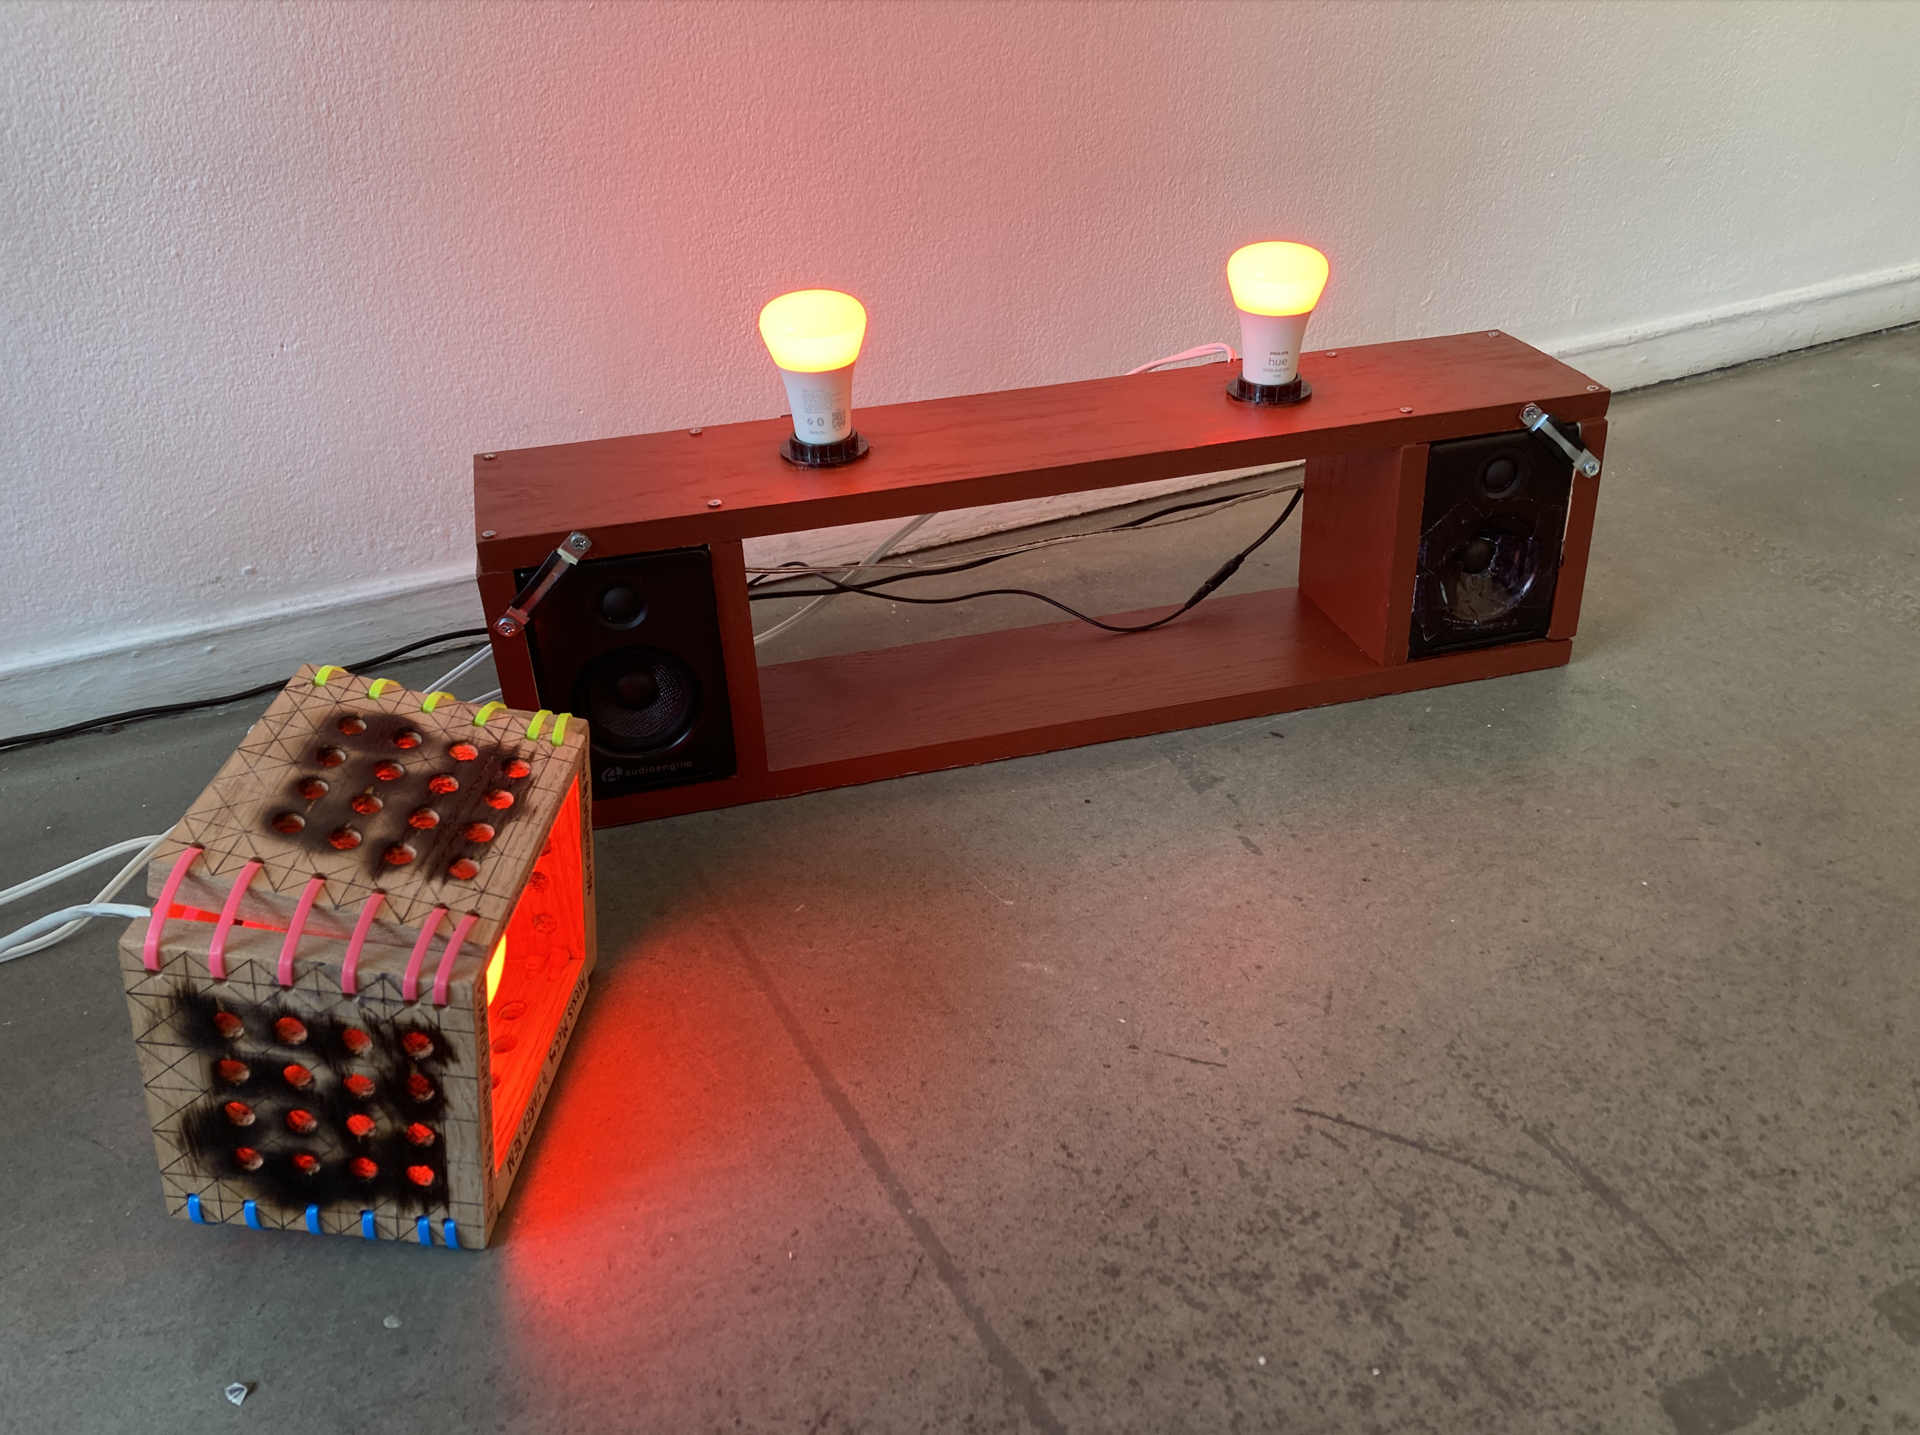 PHILIPS HUE BOOMBOX & DESK LIGHT by Jared Rem